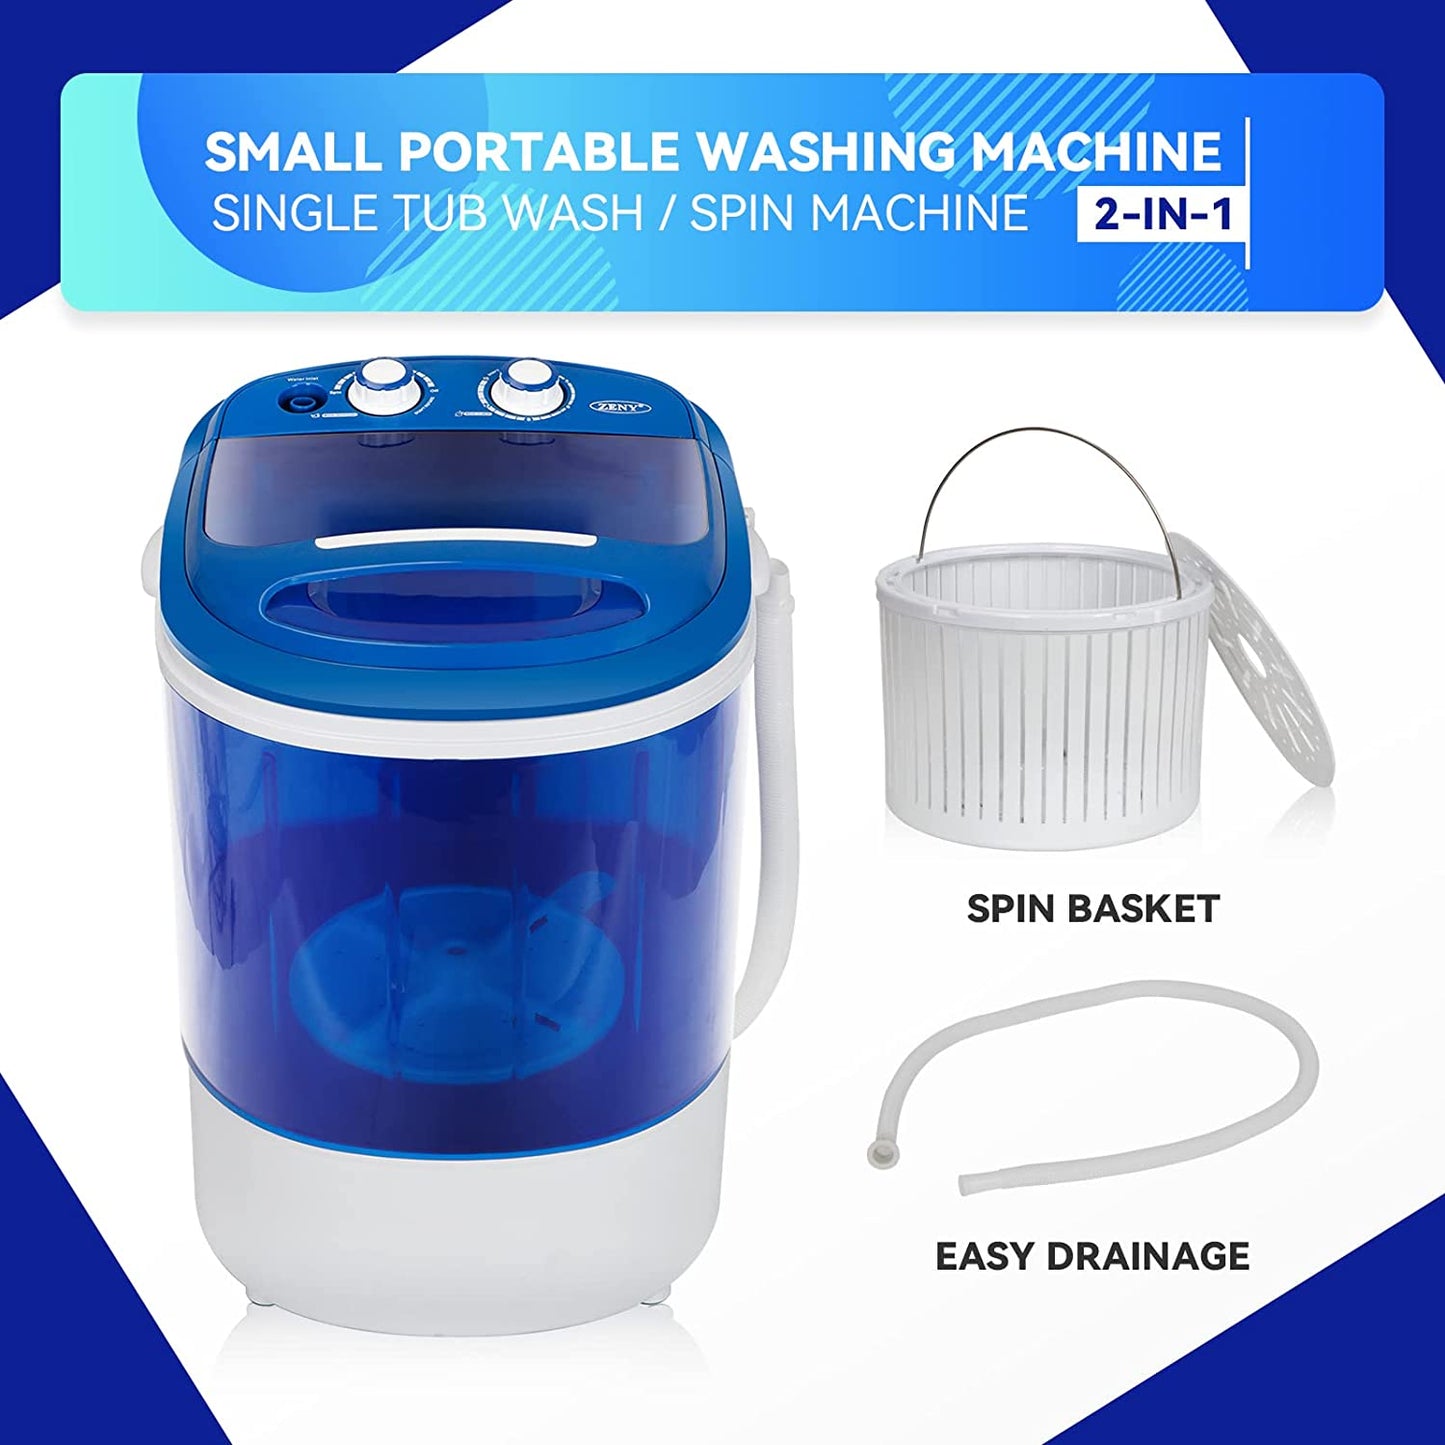 Portable Mini Washing Machine 5.7 lbs Washing Capacity Semi-Automatic Compact Washer Spinner Small Cloth Washer Laundry Appliances for Apartment, RV, Camping, Single Translucent Tub